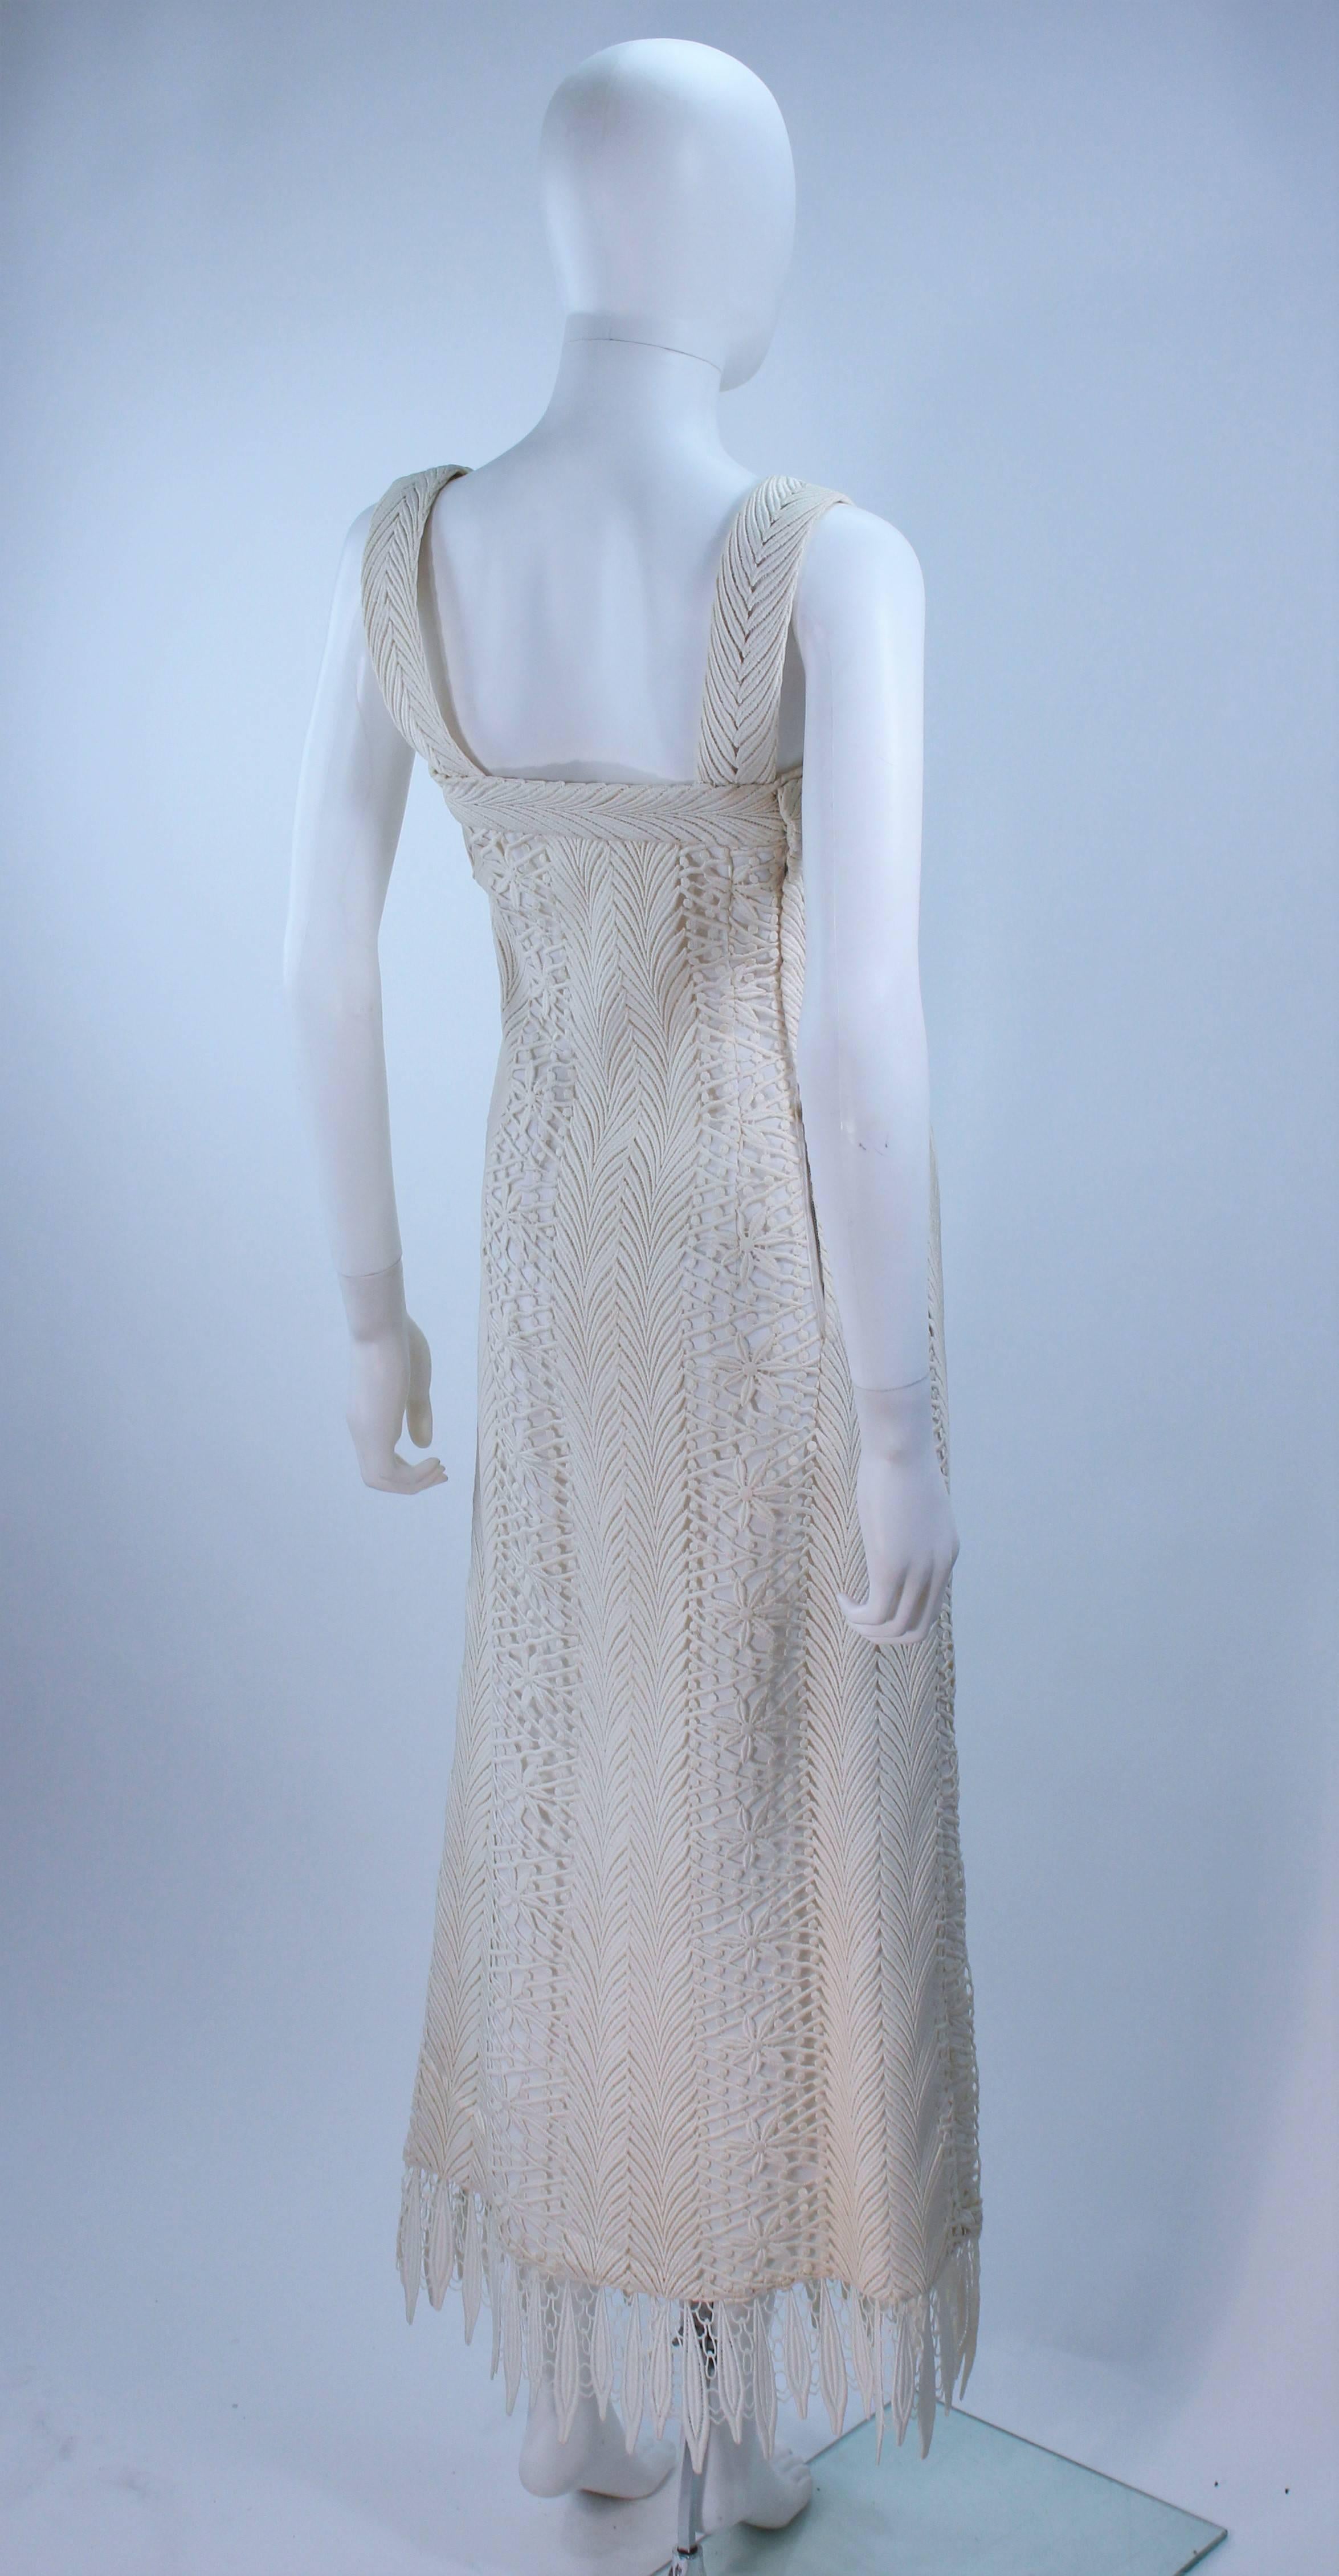 Vintage Off White Lace Applique Dress with Scalloped Edges Size 4 For Sale 1